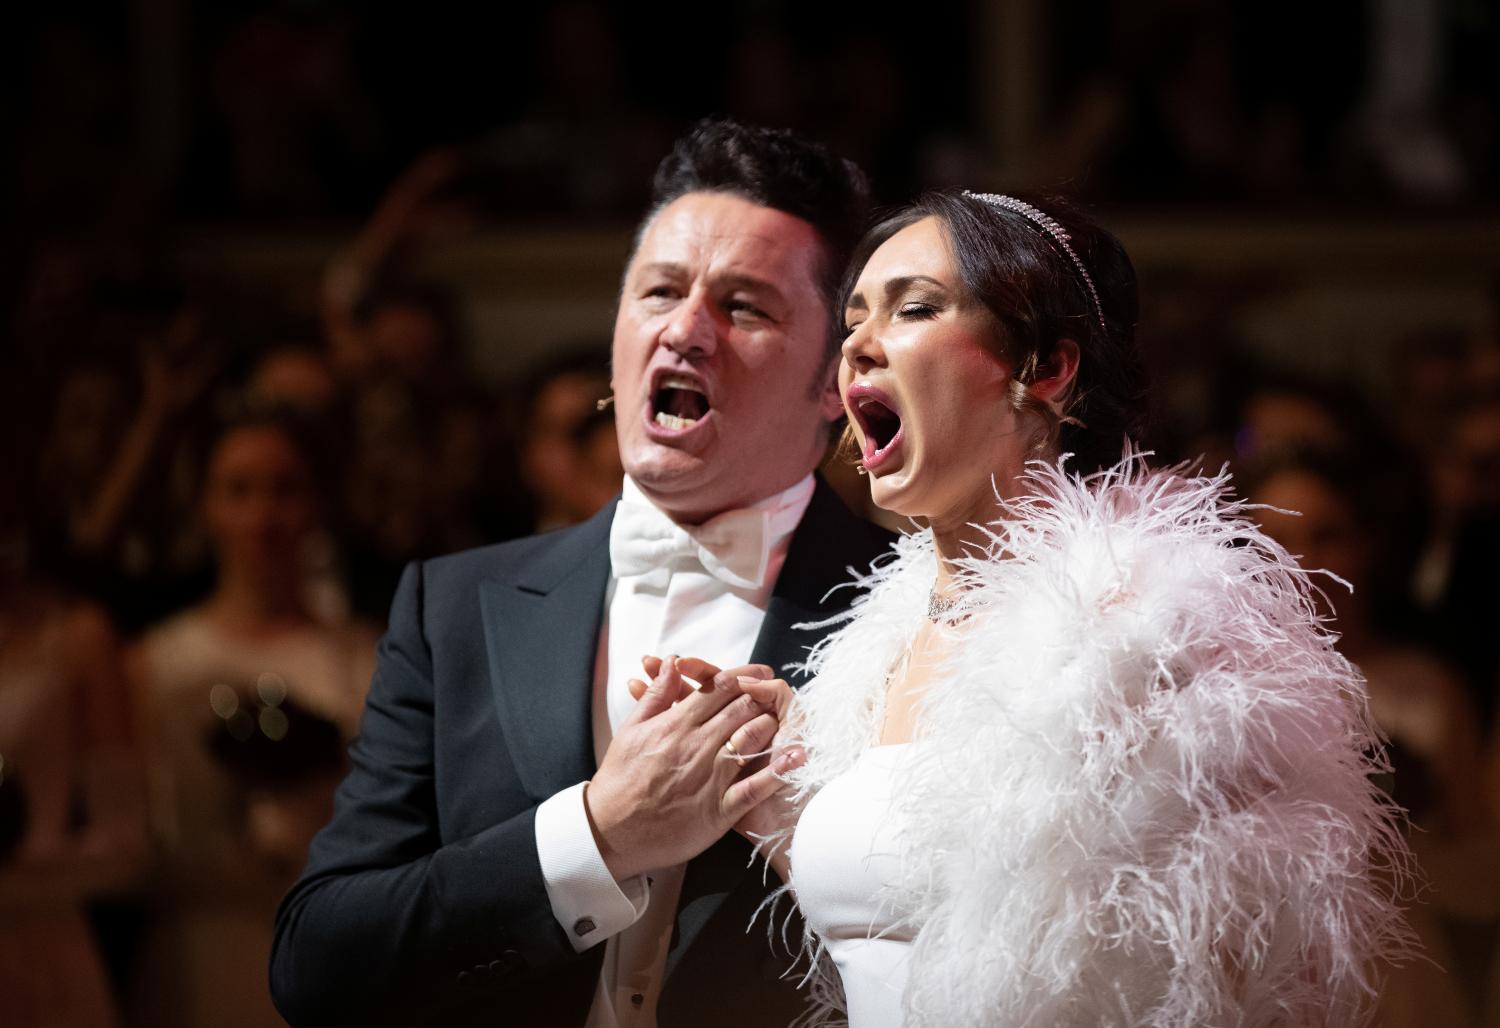 Polish tenor Piotr Beczala and Russian soprano singer Aida Garifullina perform during the opening ceremony of the traditional Opera Ball in Vienna, Austria February 20, 2020. REUTERS/Lisi Niesner